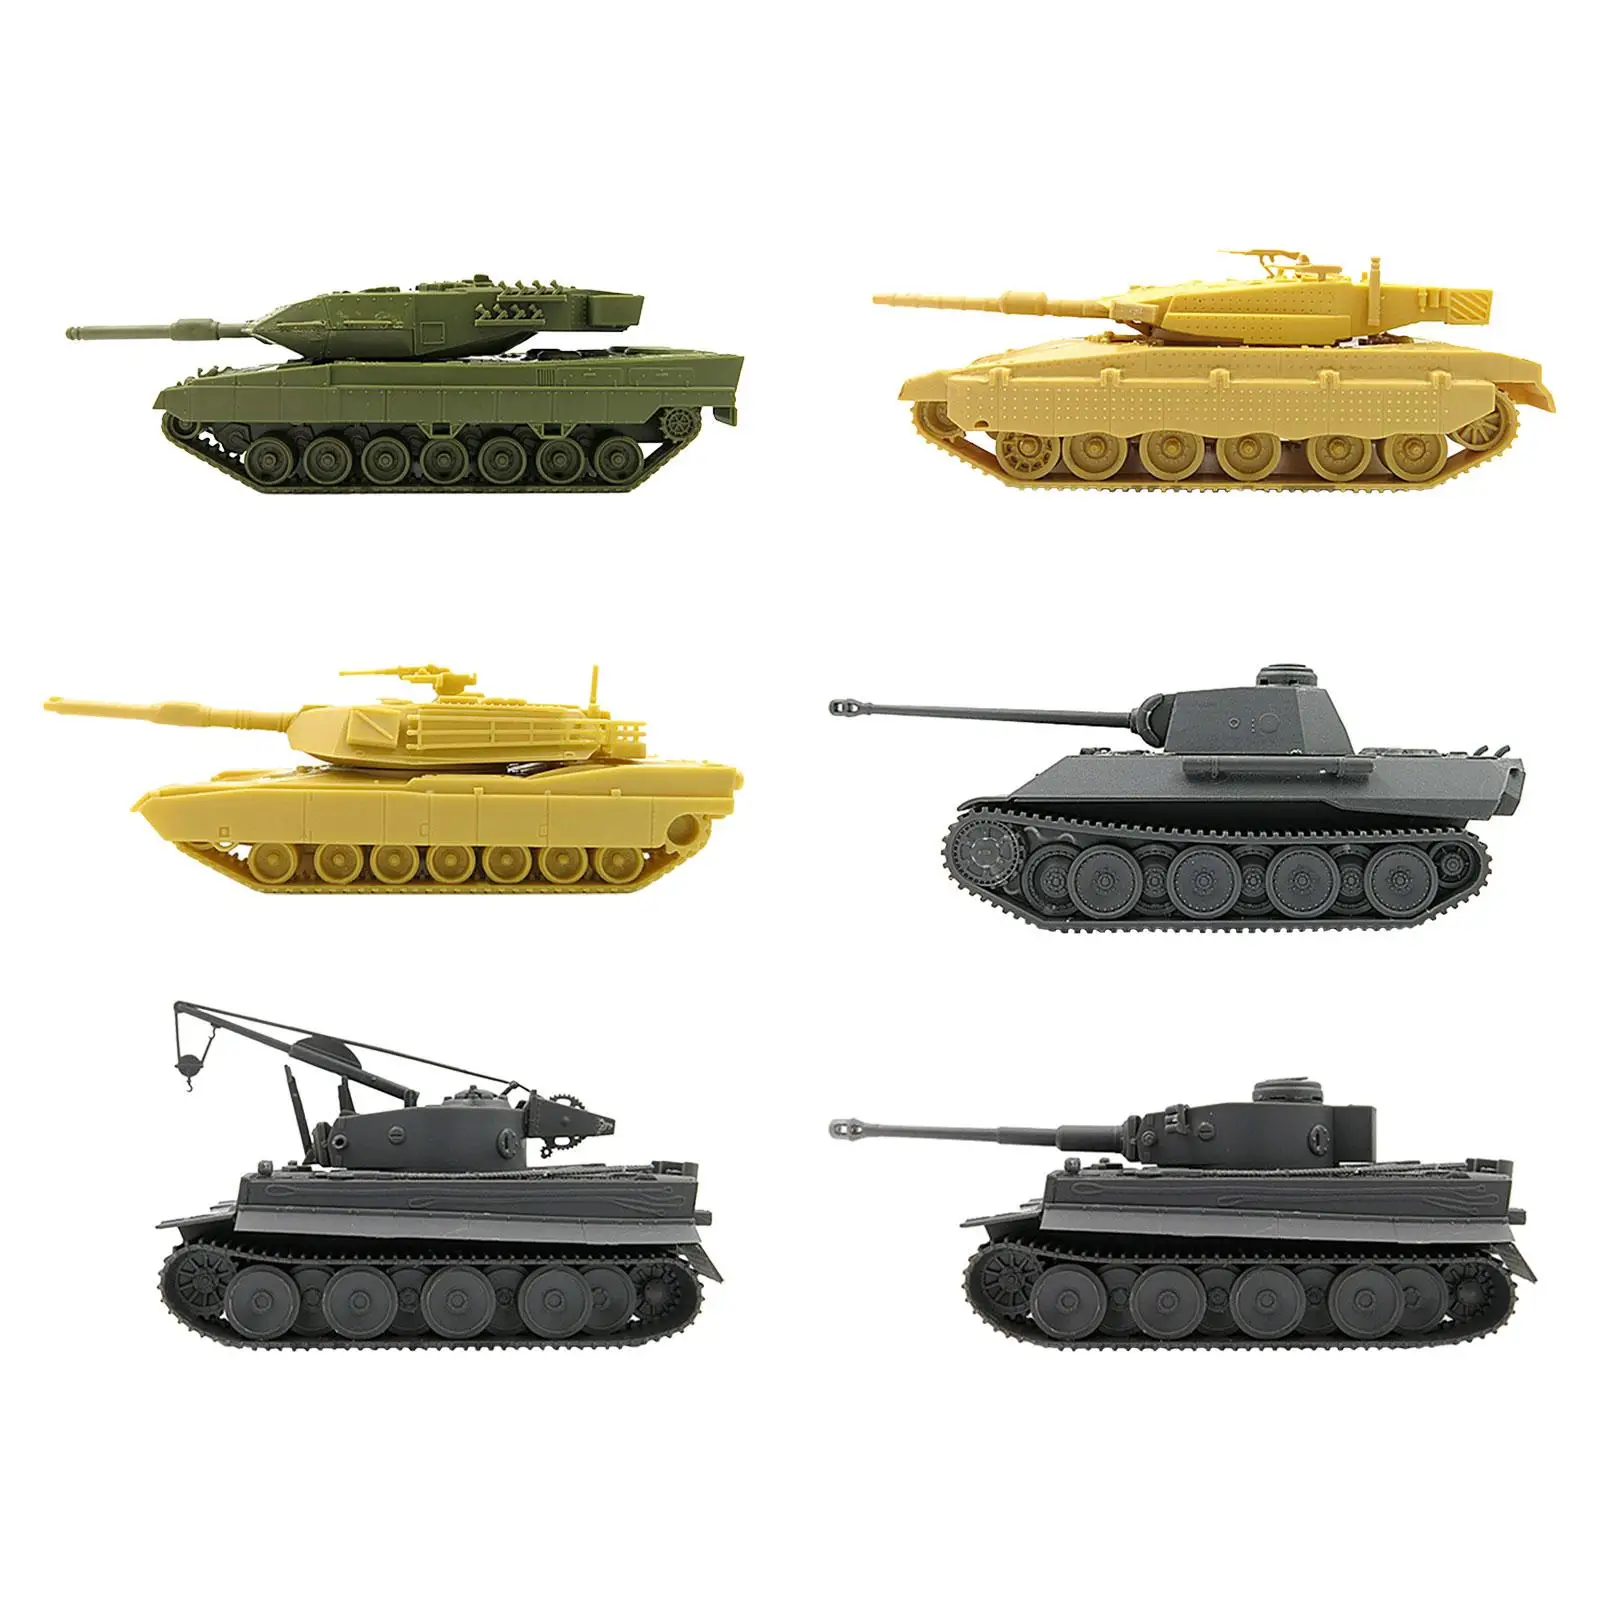 1:72 Scale Tank Model Kits Vehicle Tank Model Toy DIY Assemble Simulation Table Scene Collection for Kids Girls Adults Boy